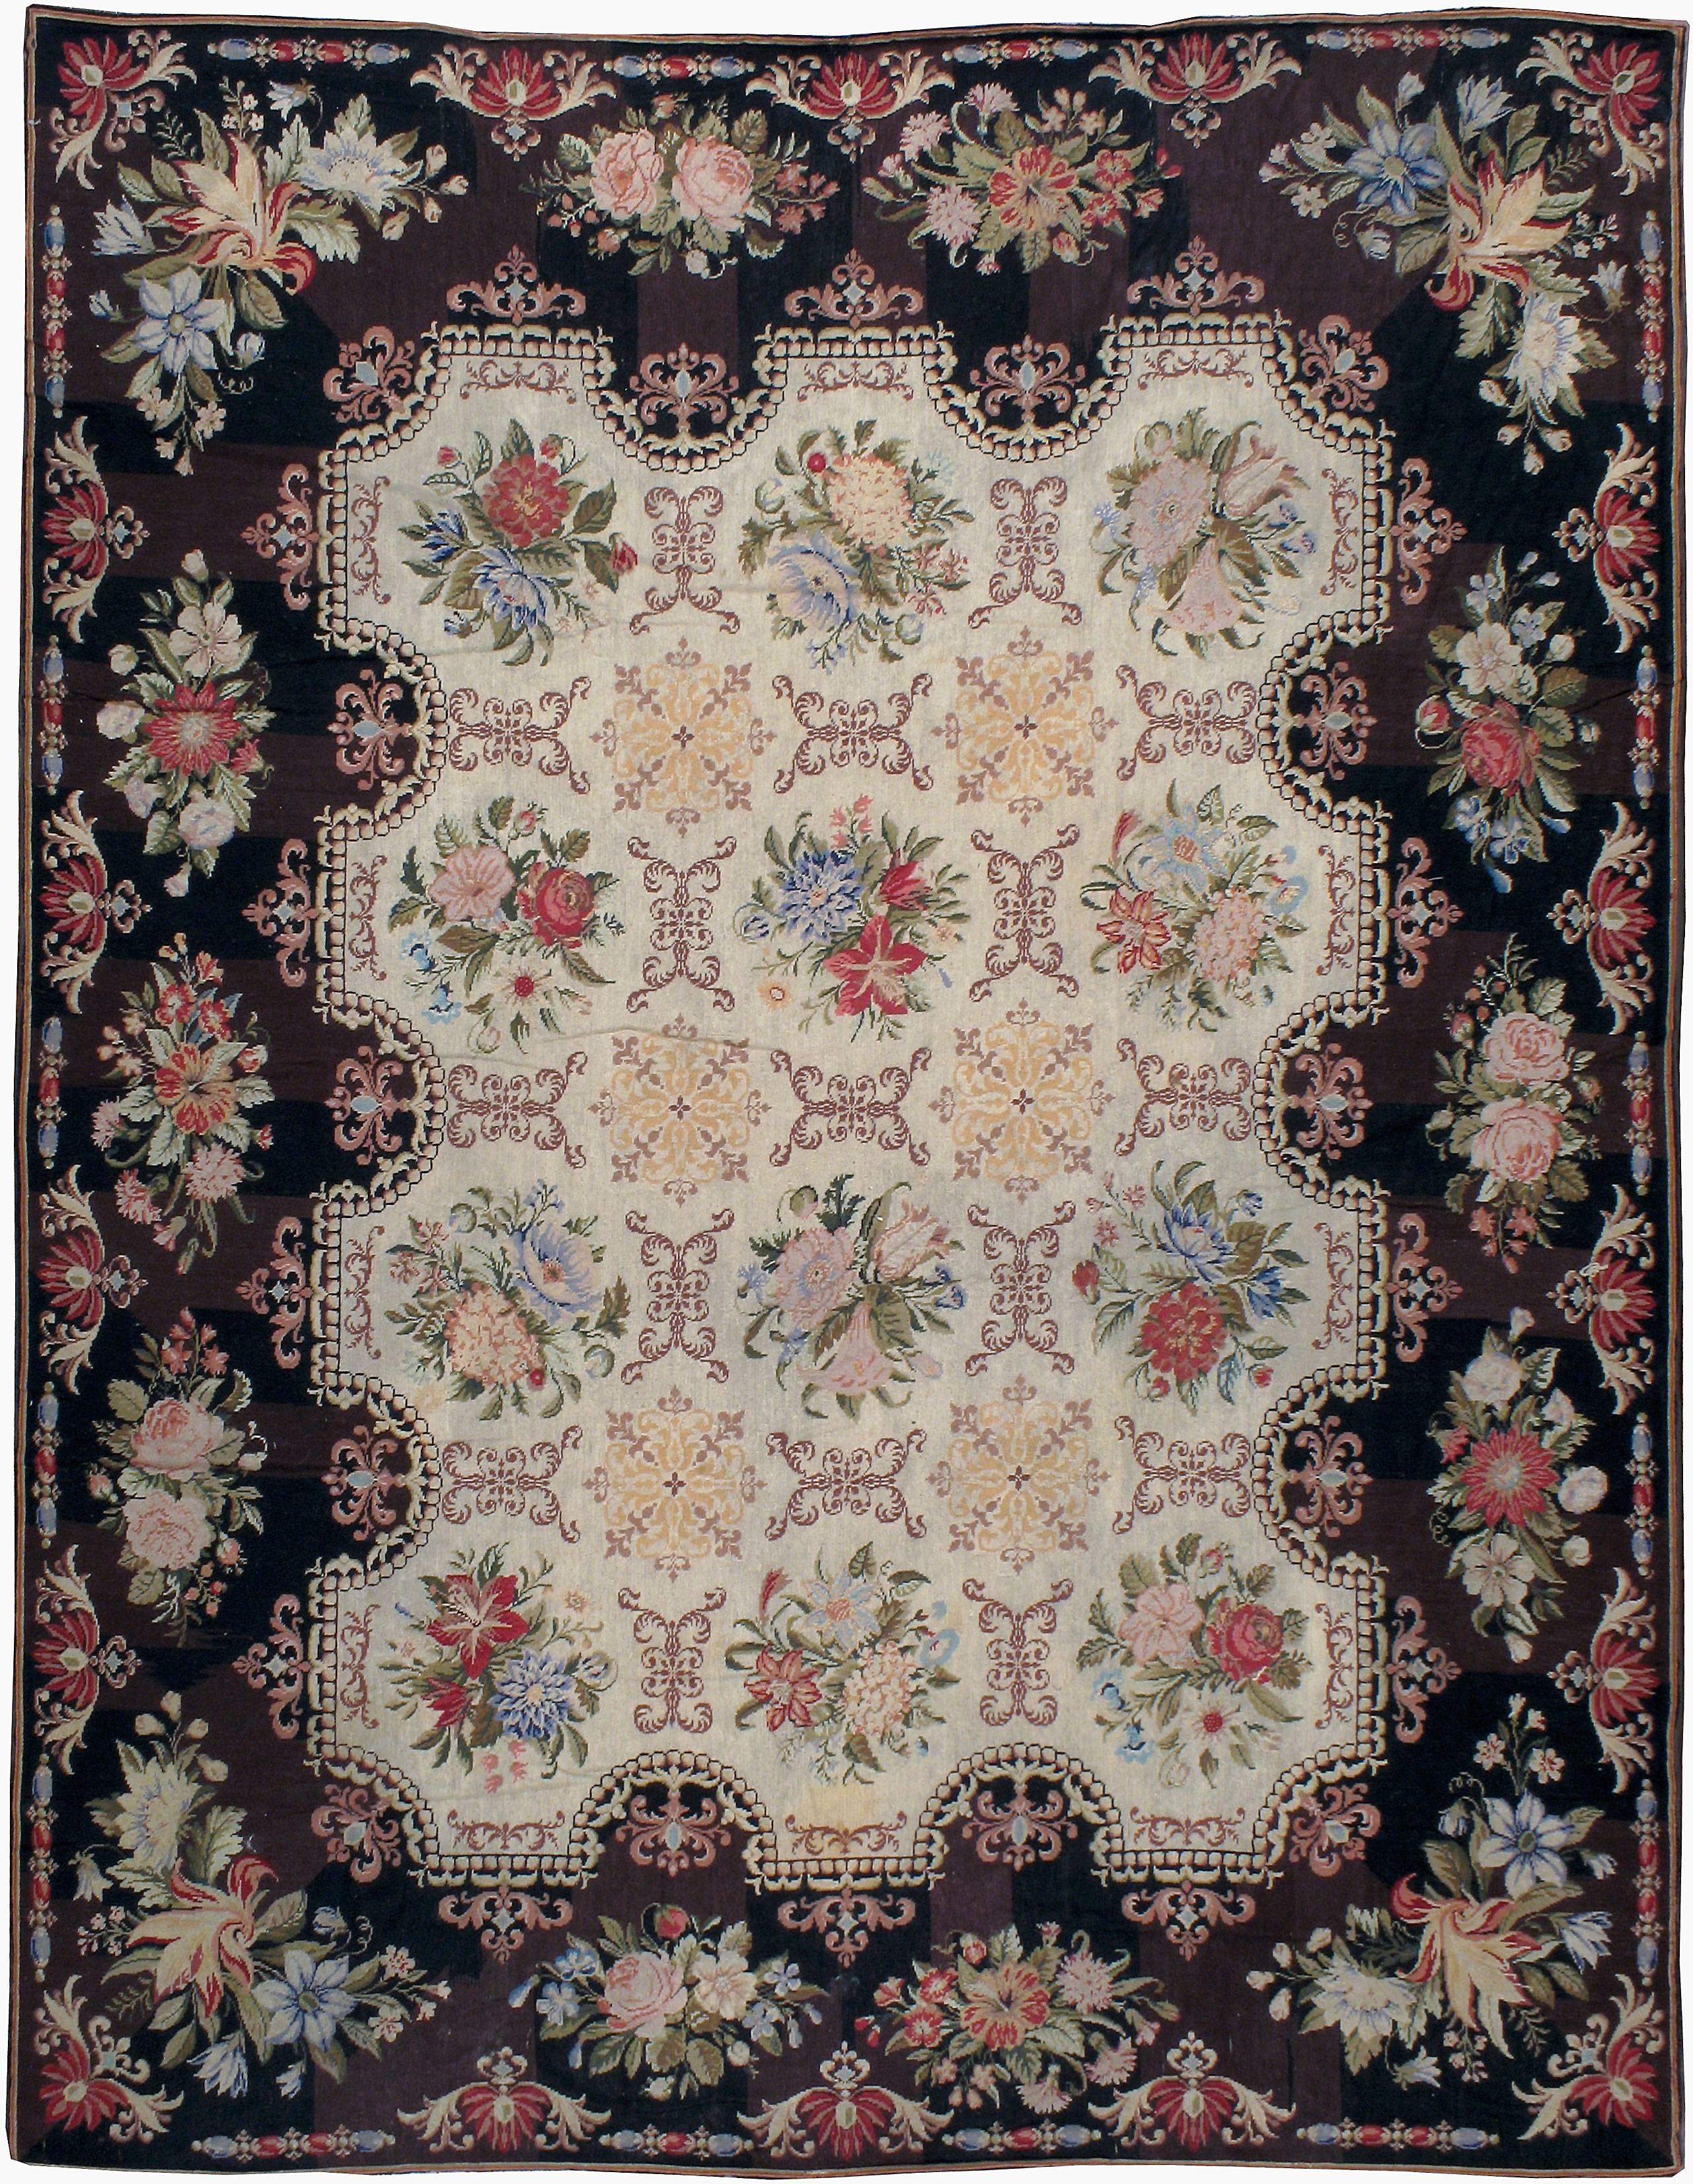 A true representation of elegance and sophistication, this flat-woven needlework dates back over 100 years, yet well preserved in its original quality. Acanthus-leaf motifs, Baroque scrolls and European floral bouquets form an eclectic medieval,